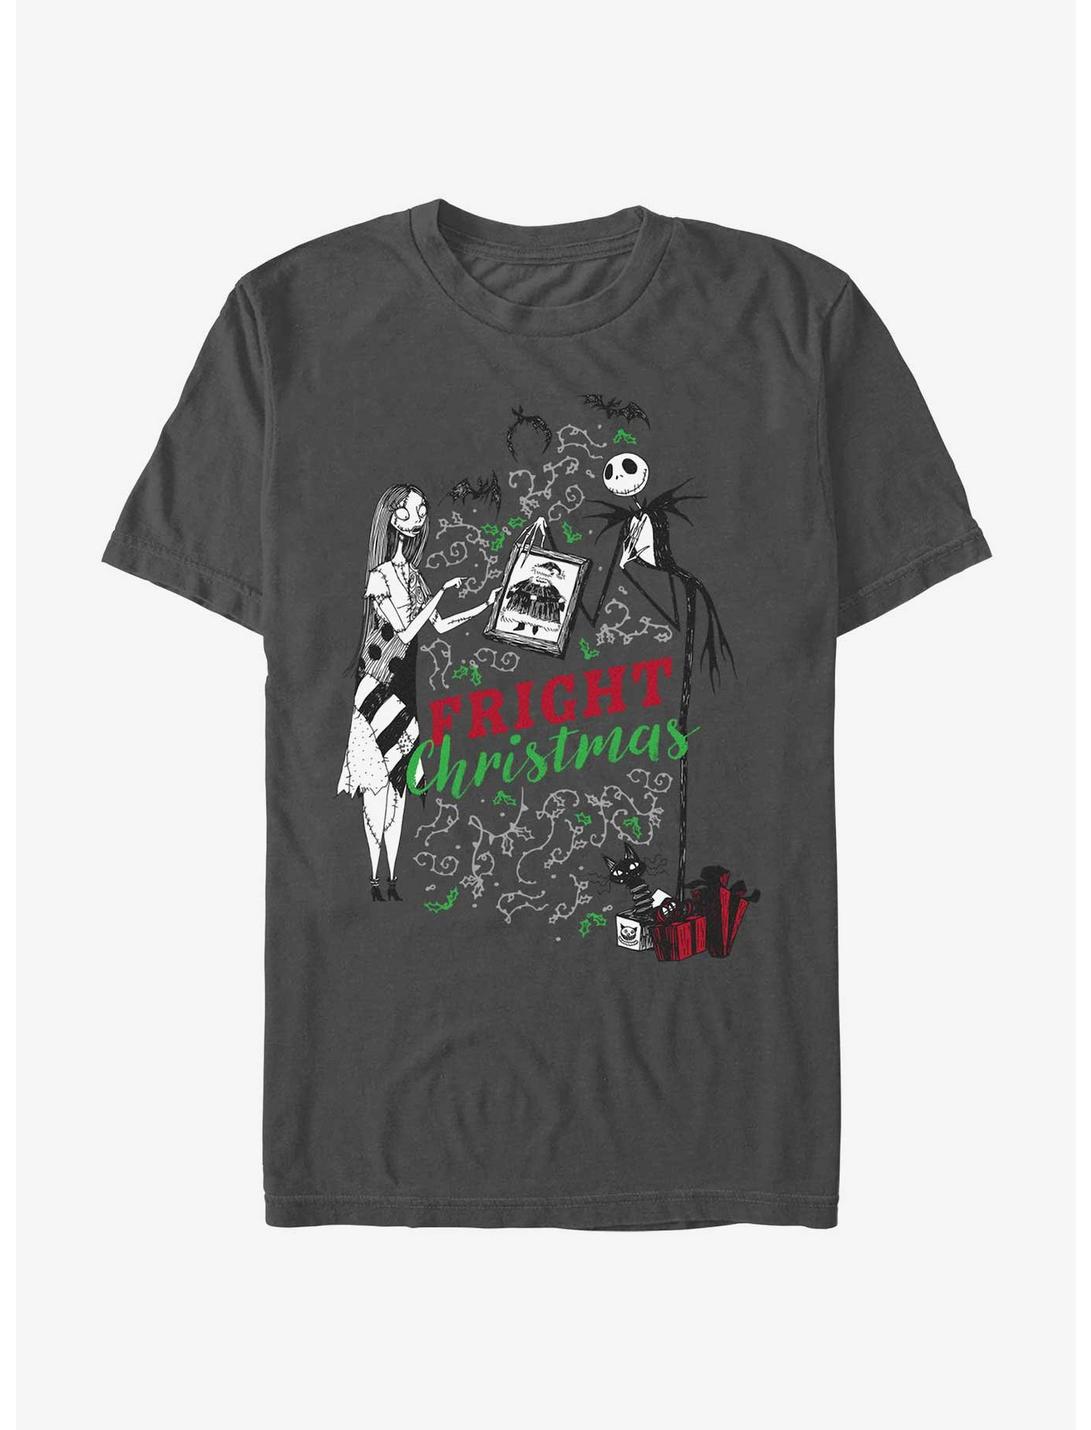 Disney Nightmare Before Christmas Fright Christmas T-Shirt, CHARCOAL, hi-res